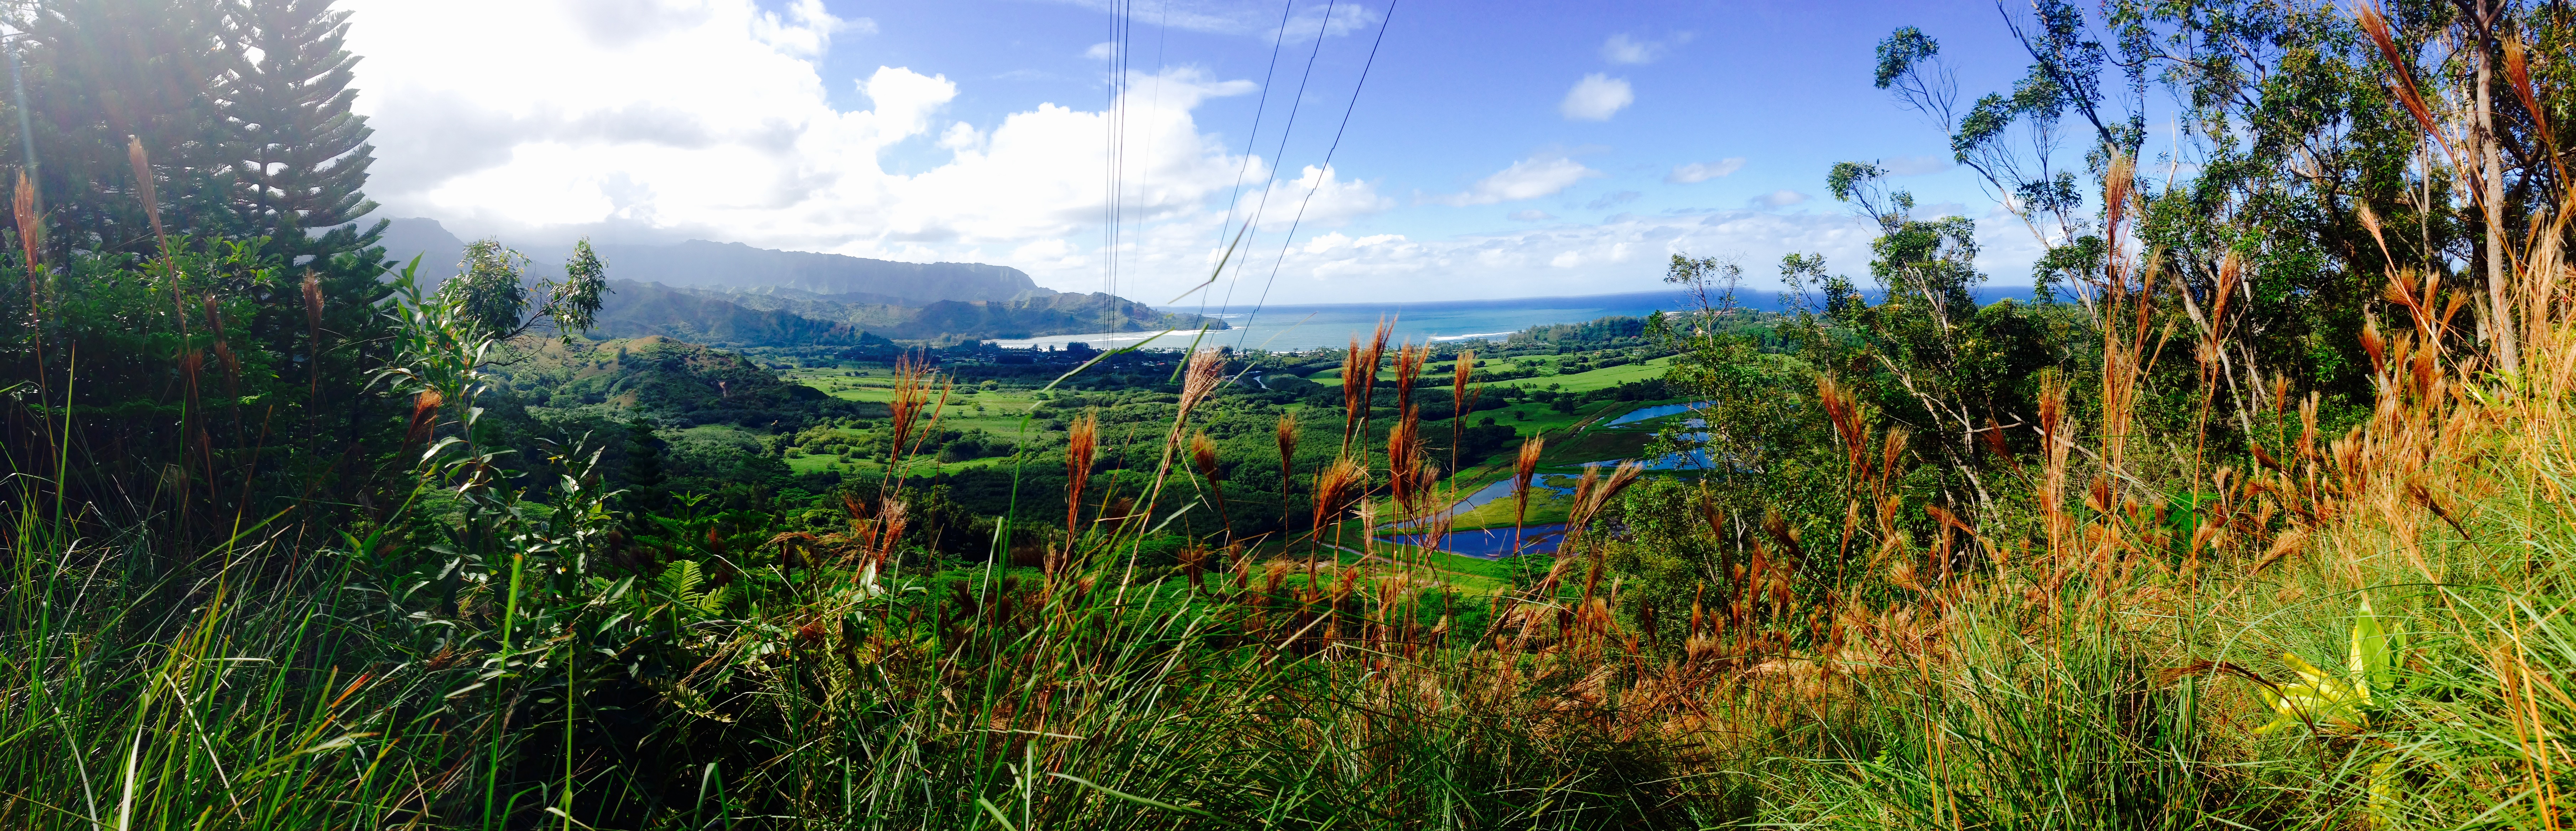 Hanalei Bay Blue Ocean and Green of the Valley